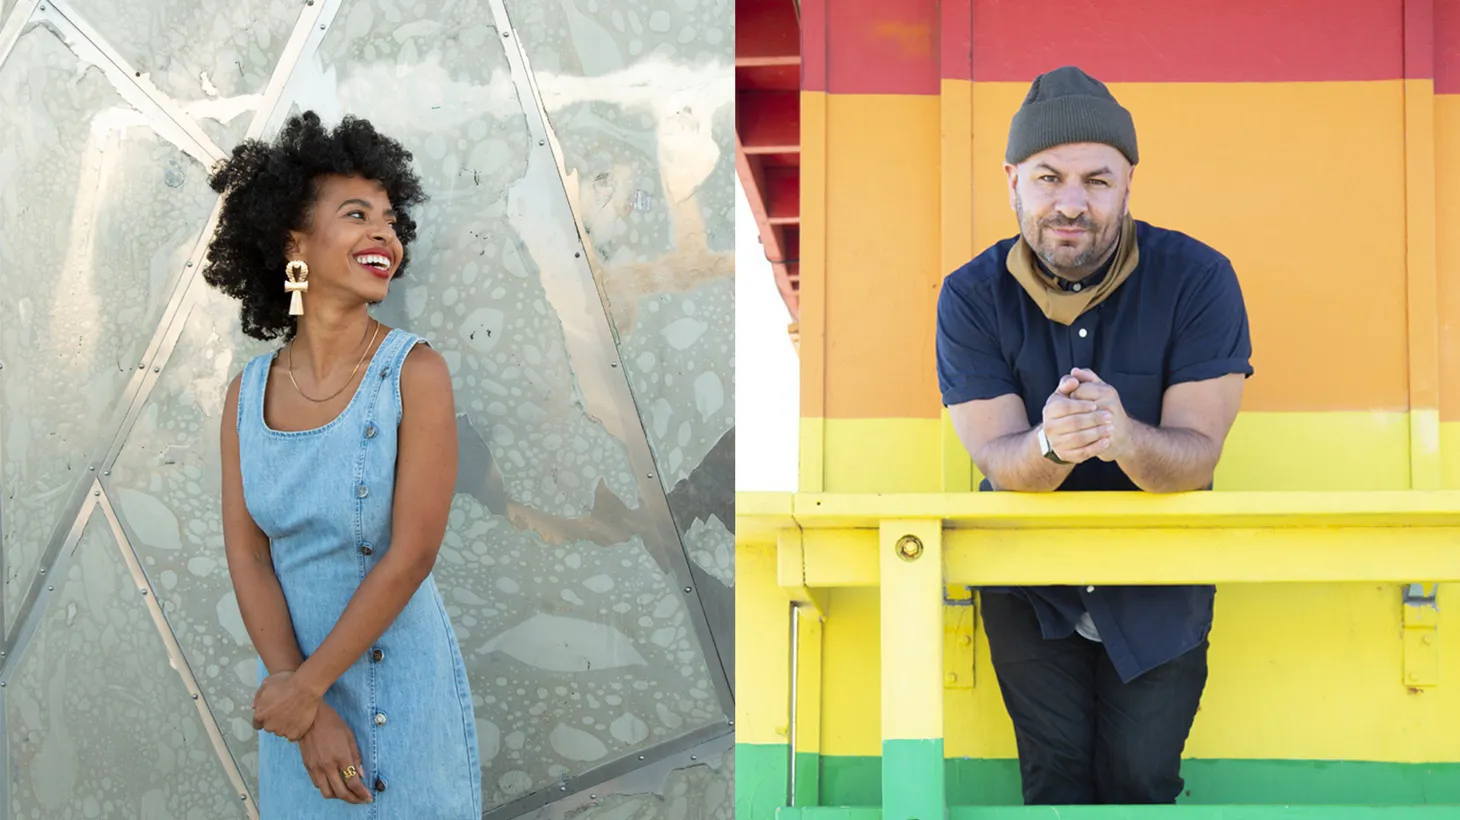 KCRW's signature music program features new releases, live performances, and artist interviews.